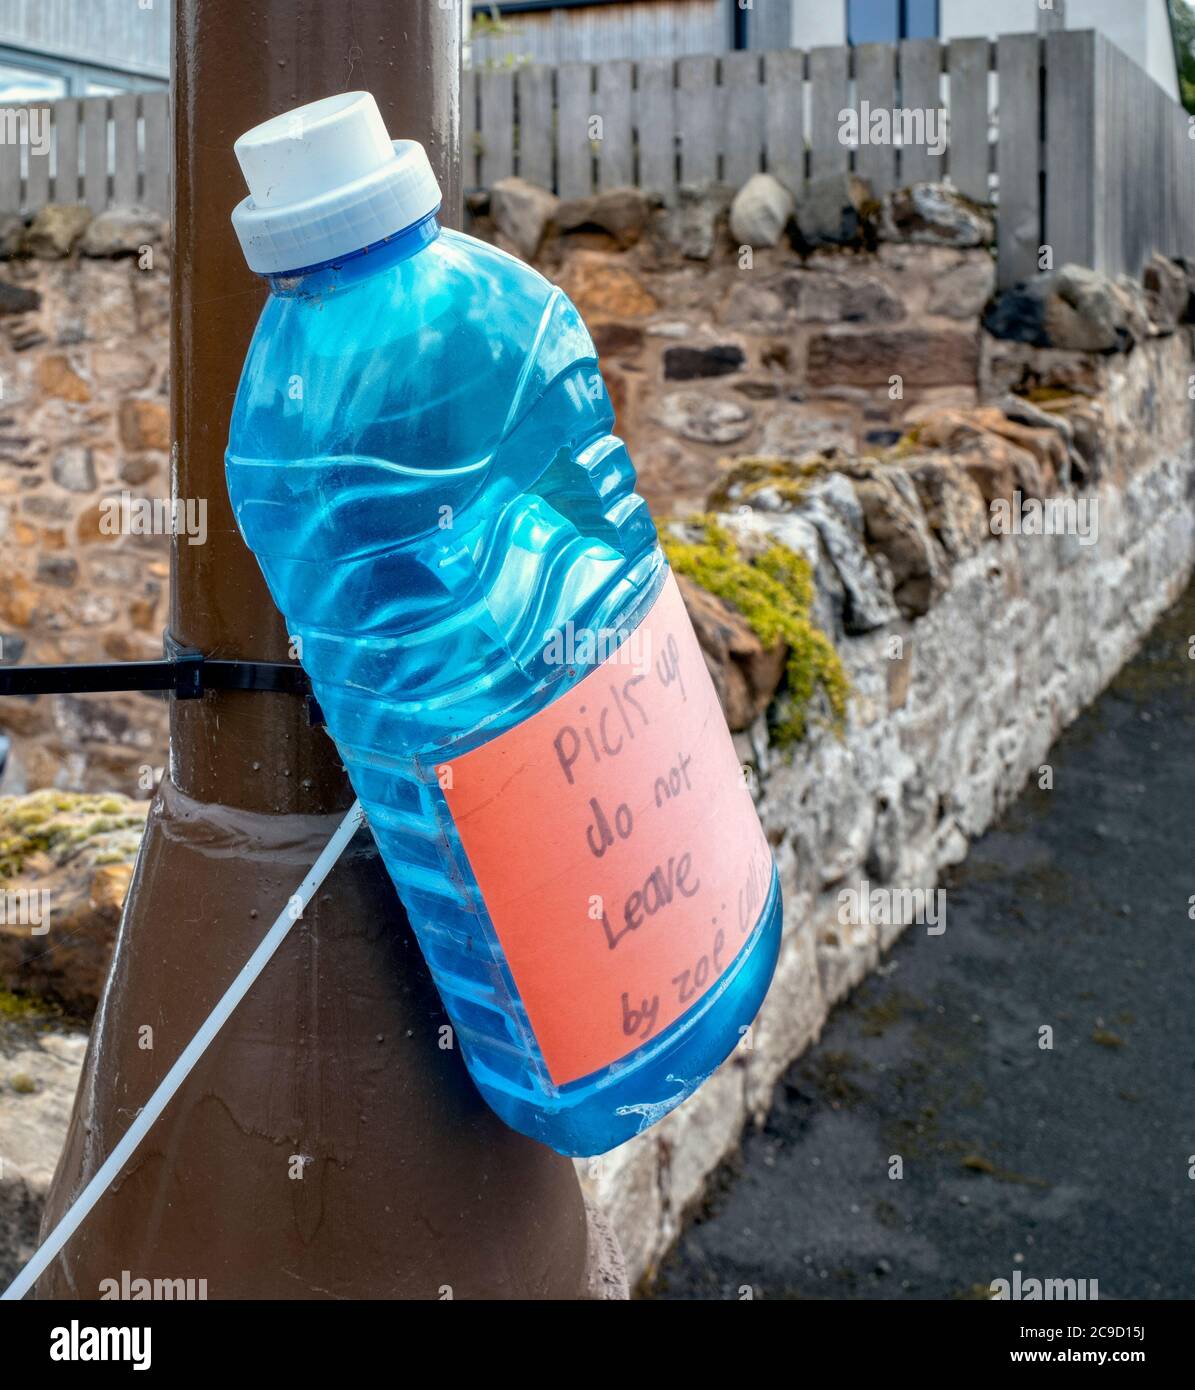 Novel litter notice of a discarded plastic bottle attached to a lampost. Stock Photo